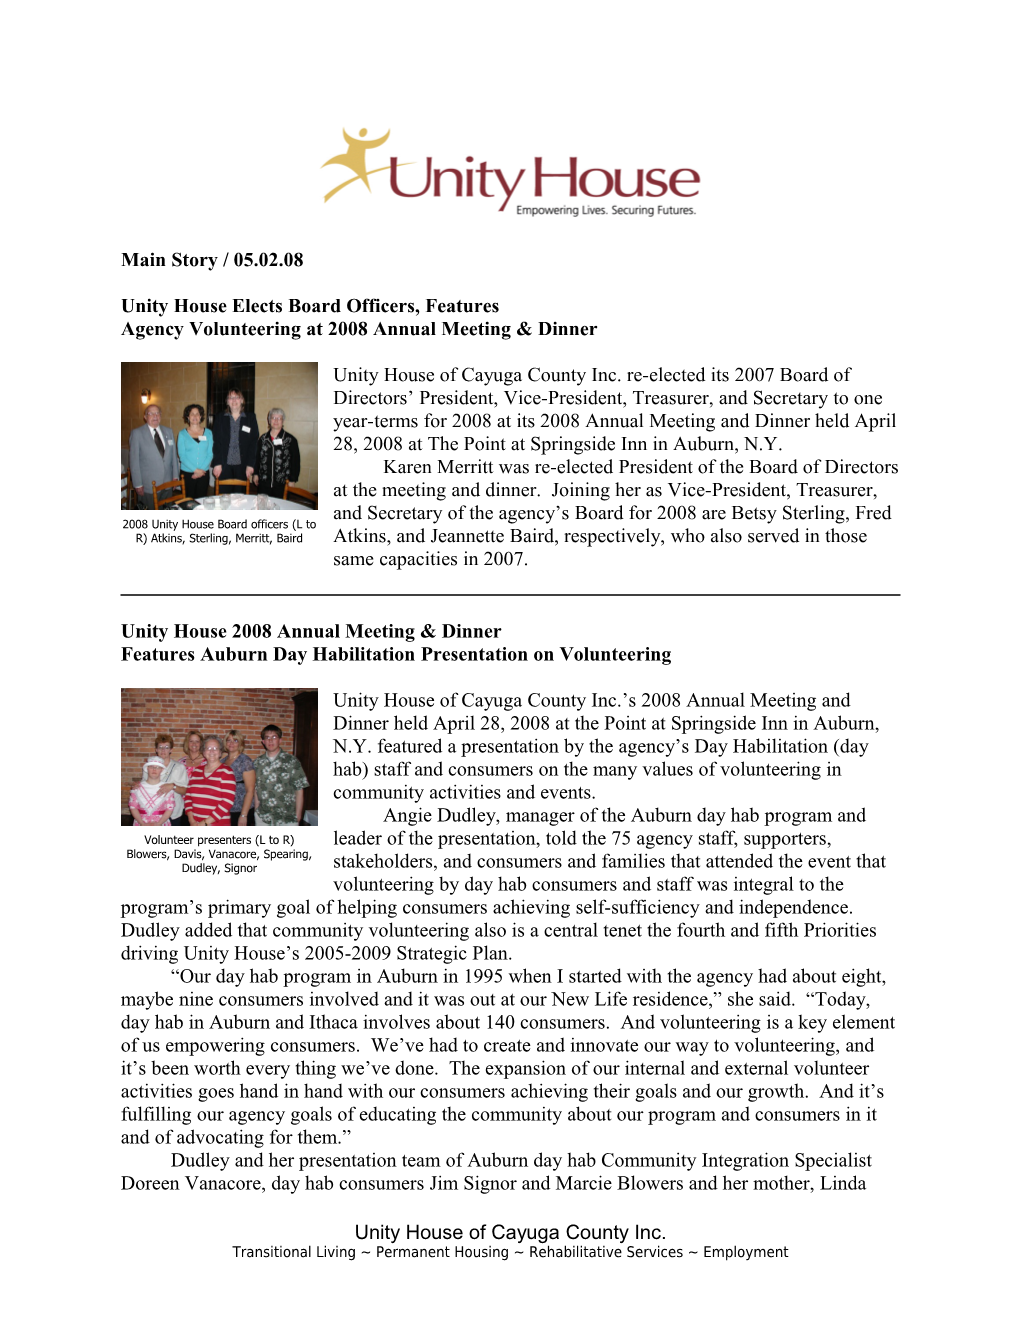 Unity House Elects Board Officers, Features